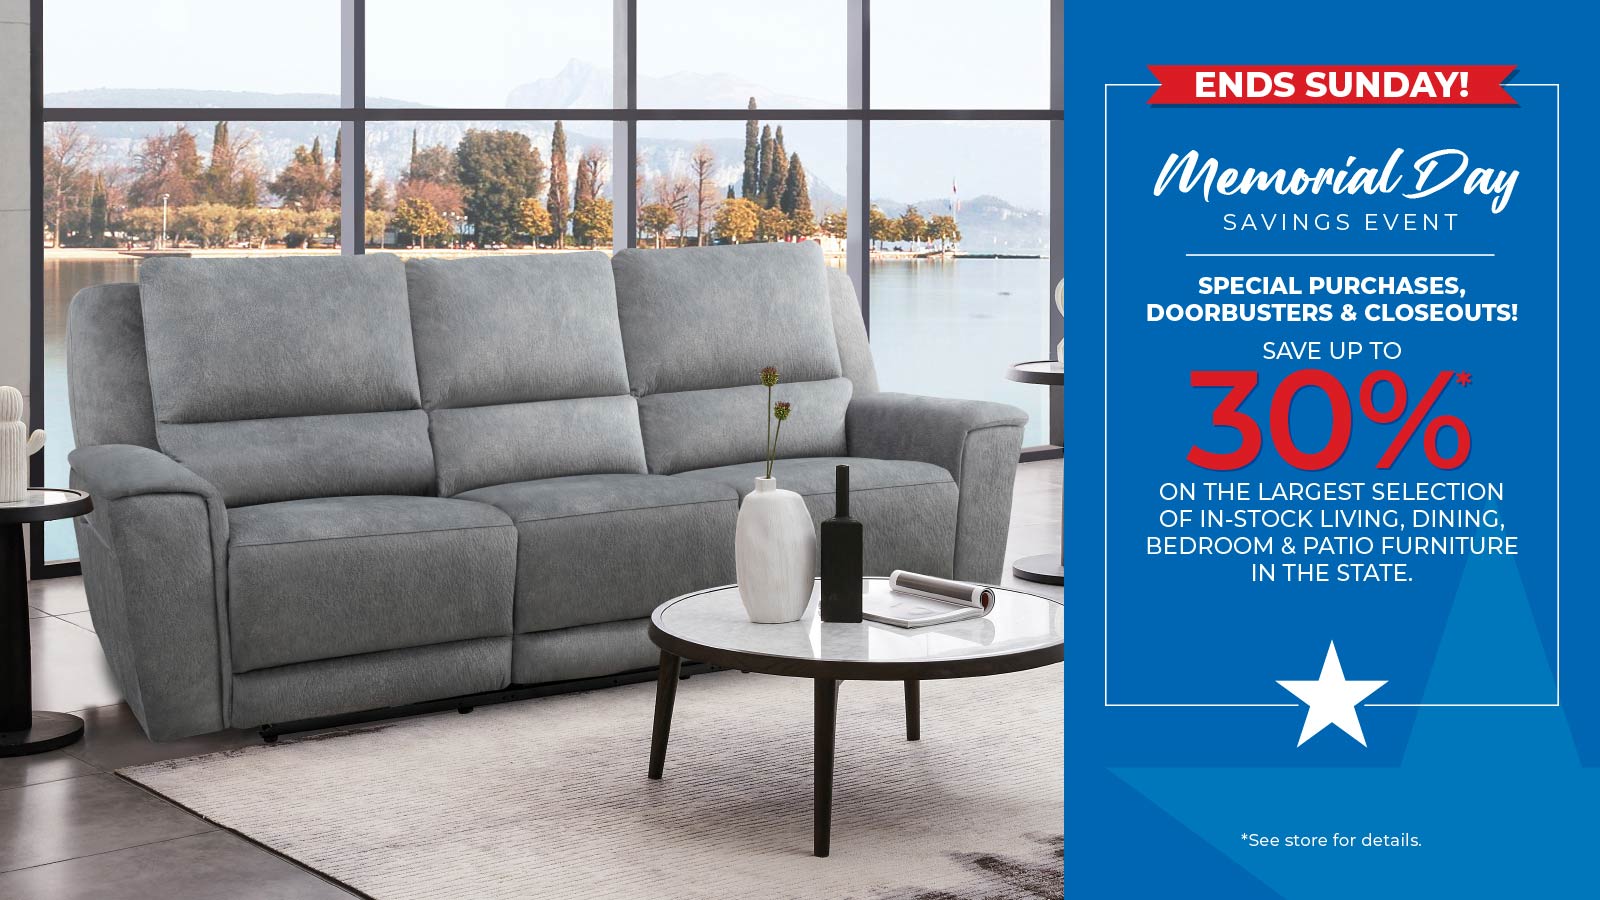 Memorial Day Savings Event - Save Up To 30% off Living, Dining, Bedrooms and Patio Furniture